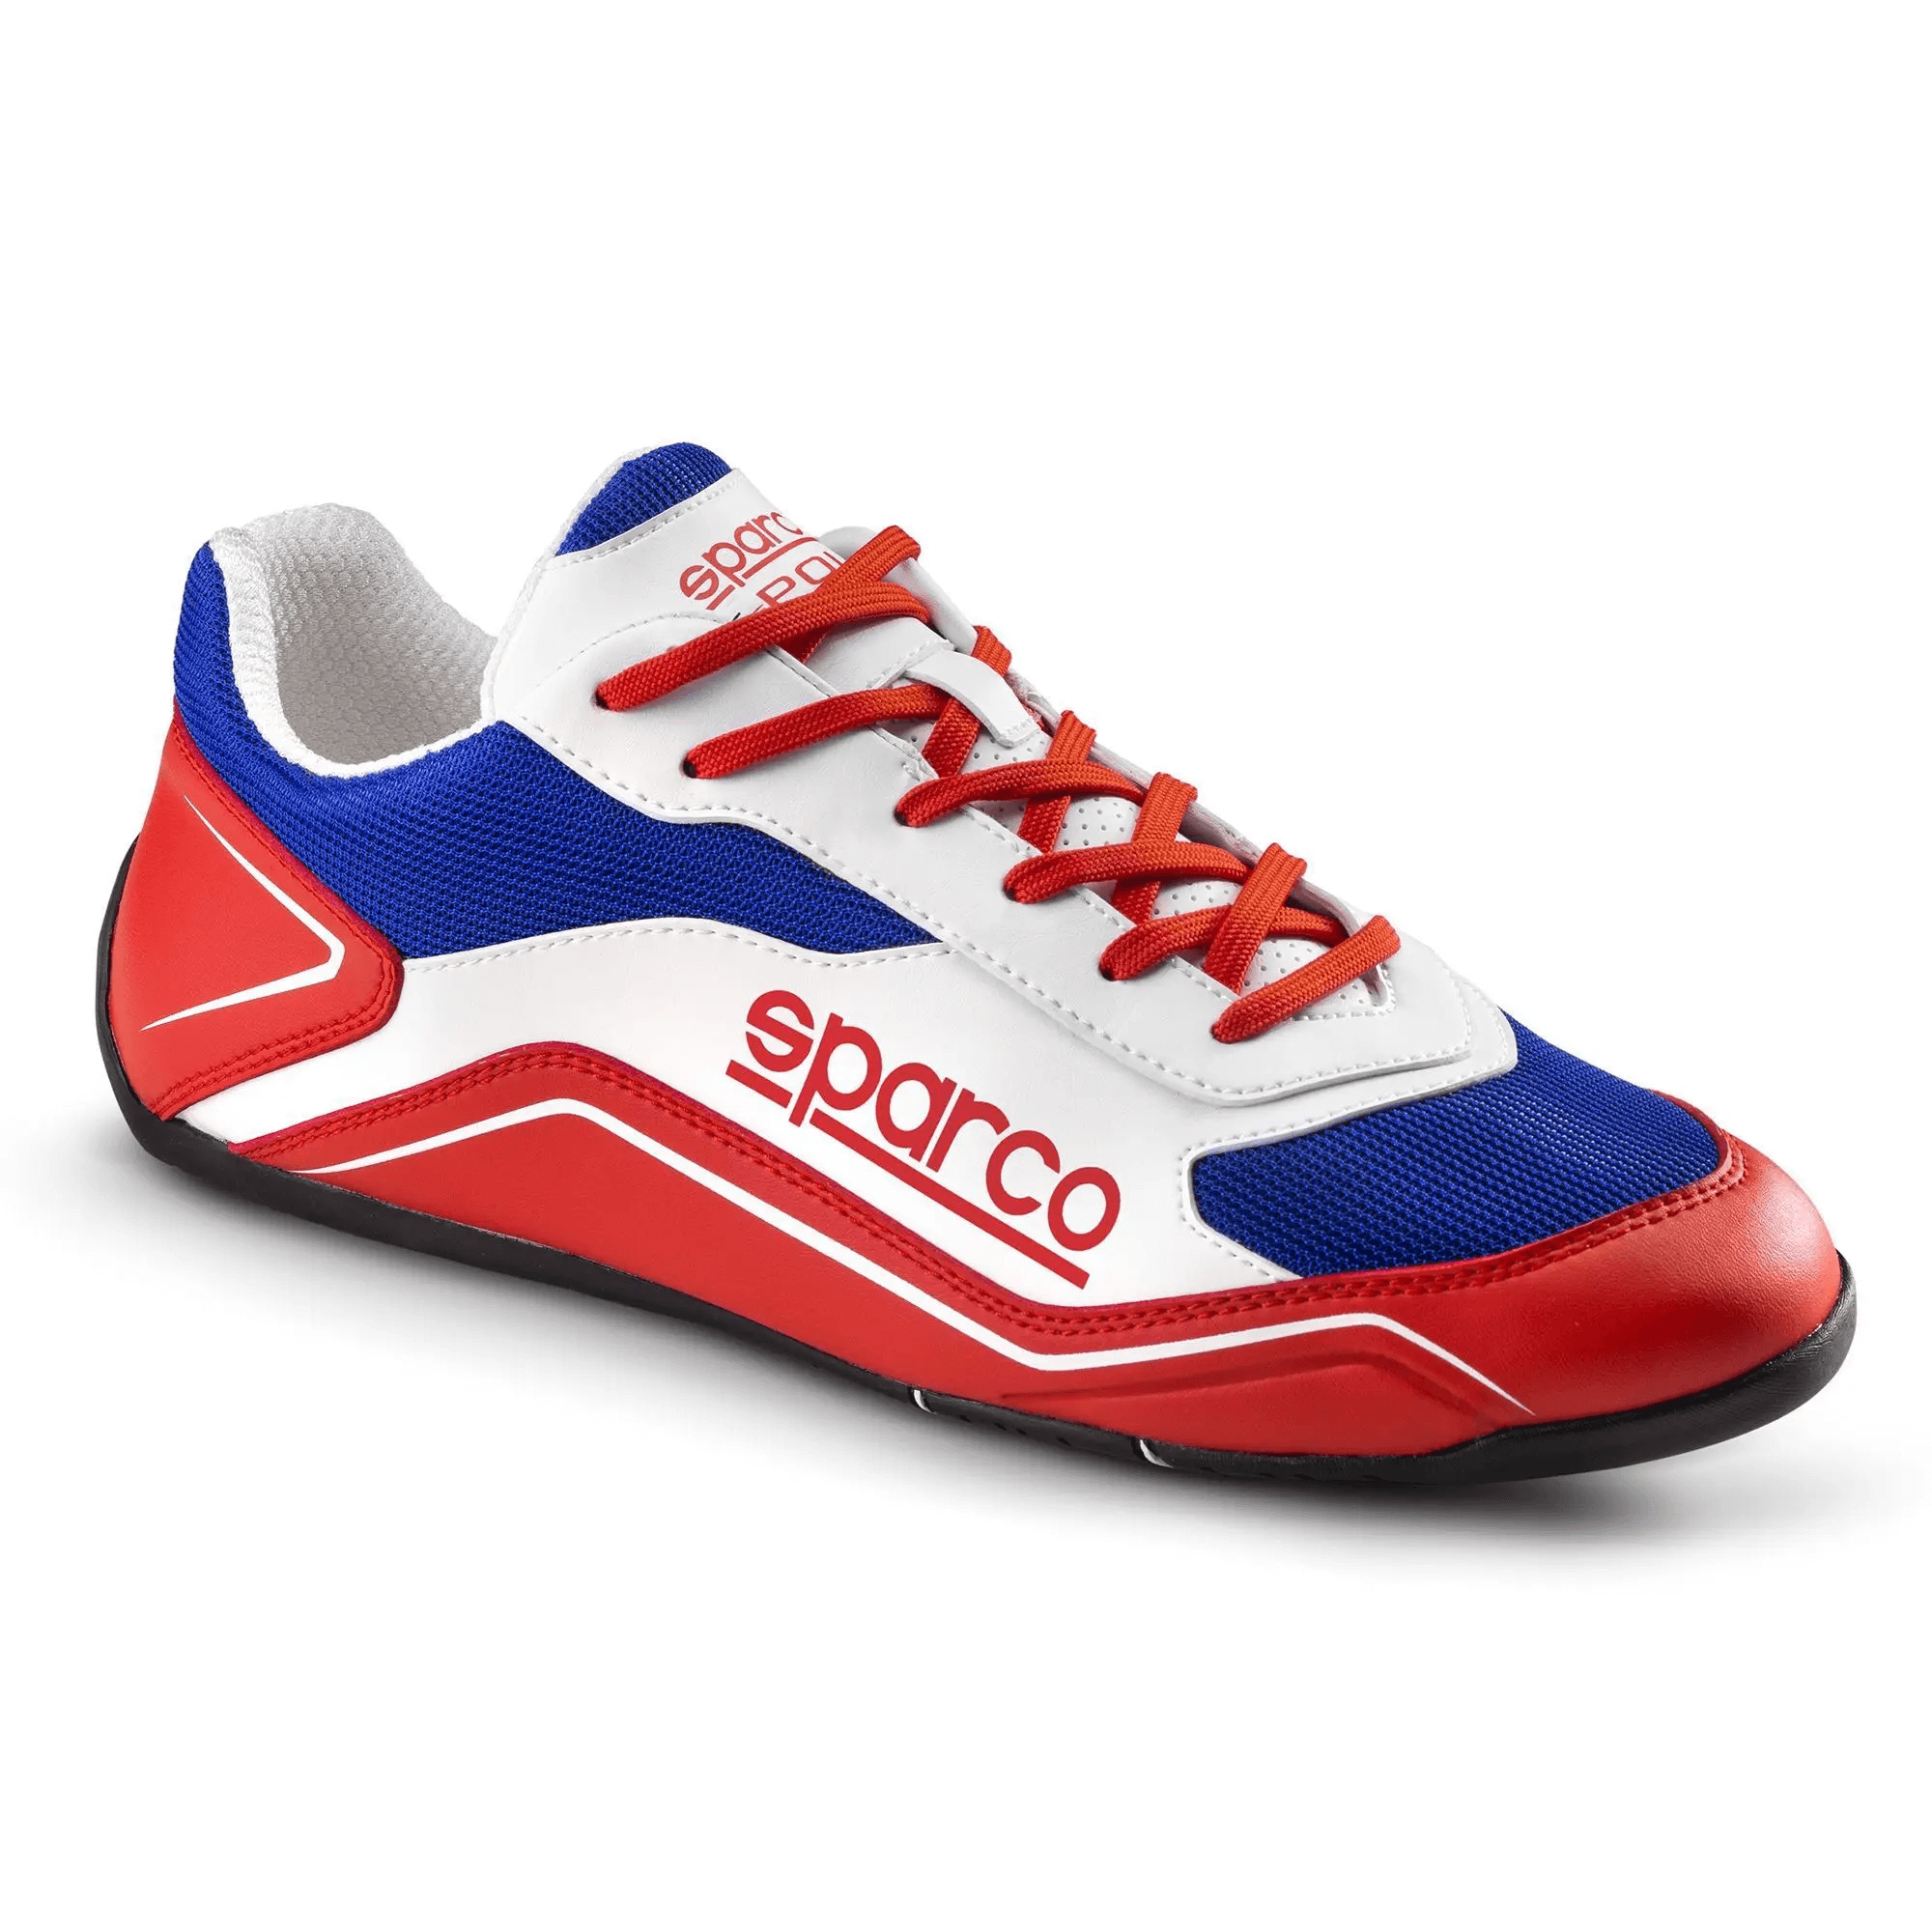 CHAUSSURES HYPERDRIVE SPARCO - Chaussures SimRacing